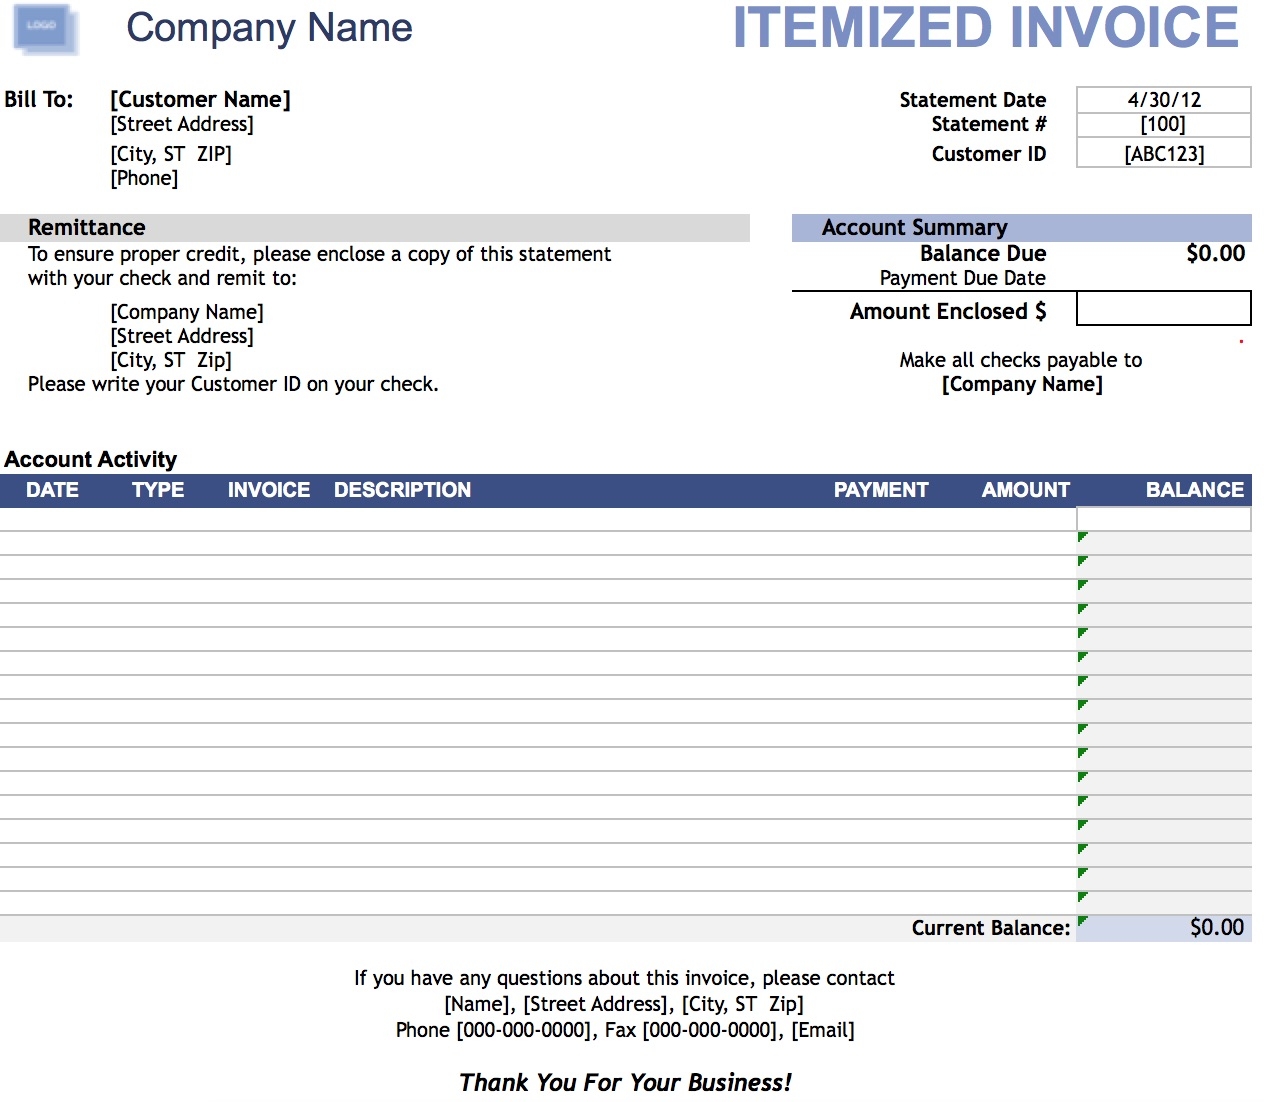 itemized invoice template free itemized invoice template excel pdf word doc 1264 X 1102